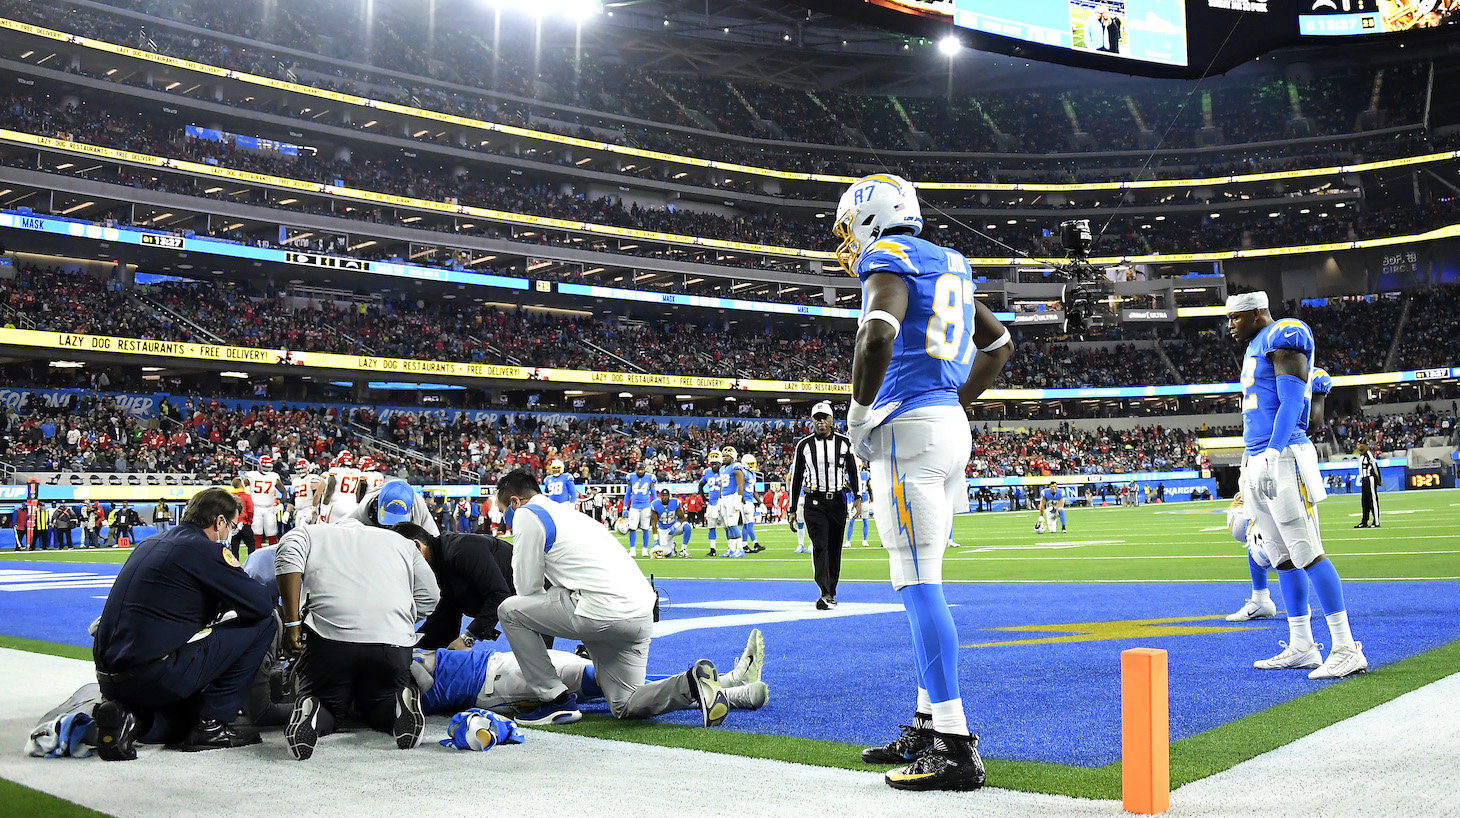 INGLEWOOD, CALIFORNIA - DECEMBER 16: Jared Cook #87 of the Los Angeles Chargers watches as teammate Donald Parham #89 is assessed for injury in the first quarter of the game against the Kansas City Chiefs at SoFi Stadium on December 16, 2021 in Inglewood, California. (Photo by Kevork Djansezian/Getty Images)